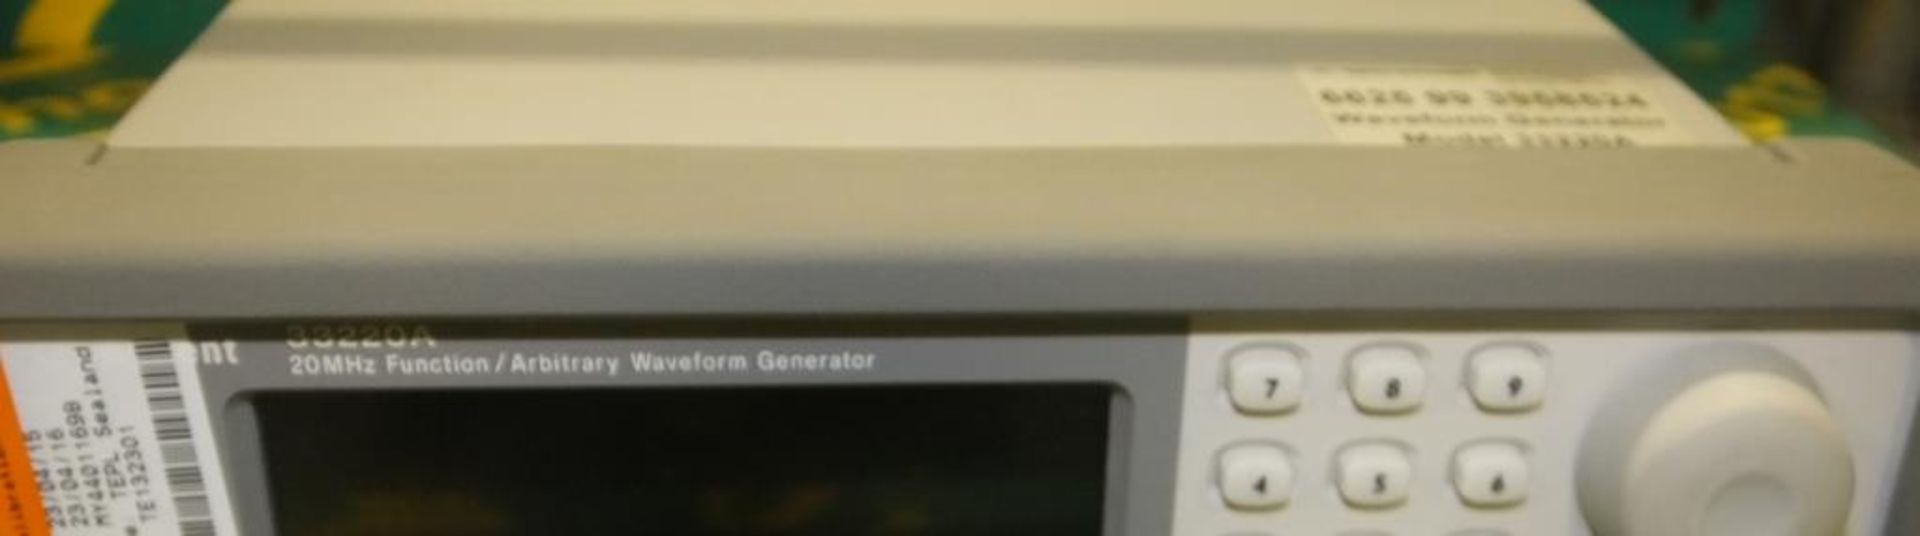 Agilent 33220A 20MHz Function / Arbitrary Waveform Generator - Image 2 of 2